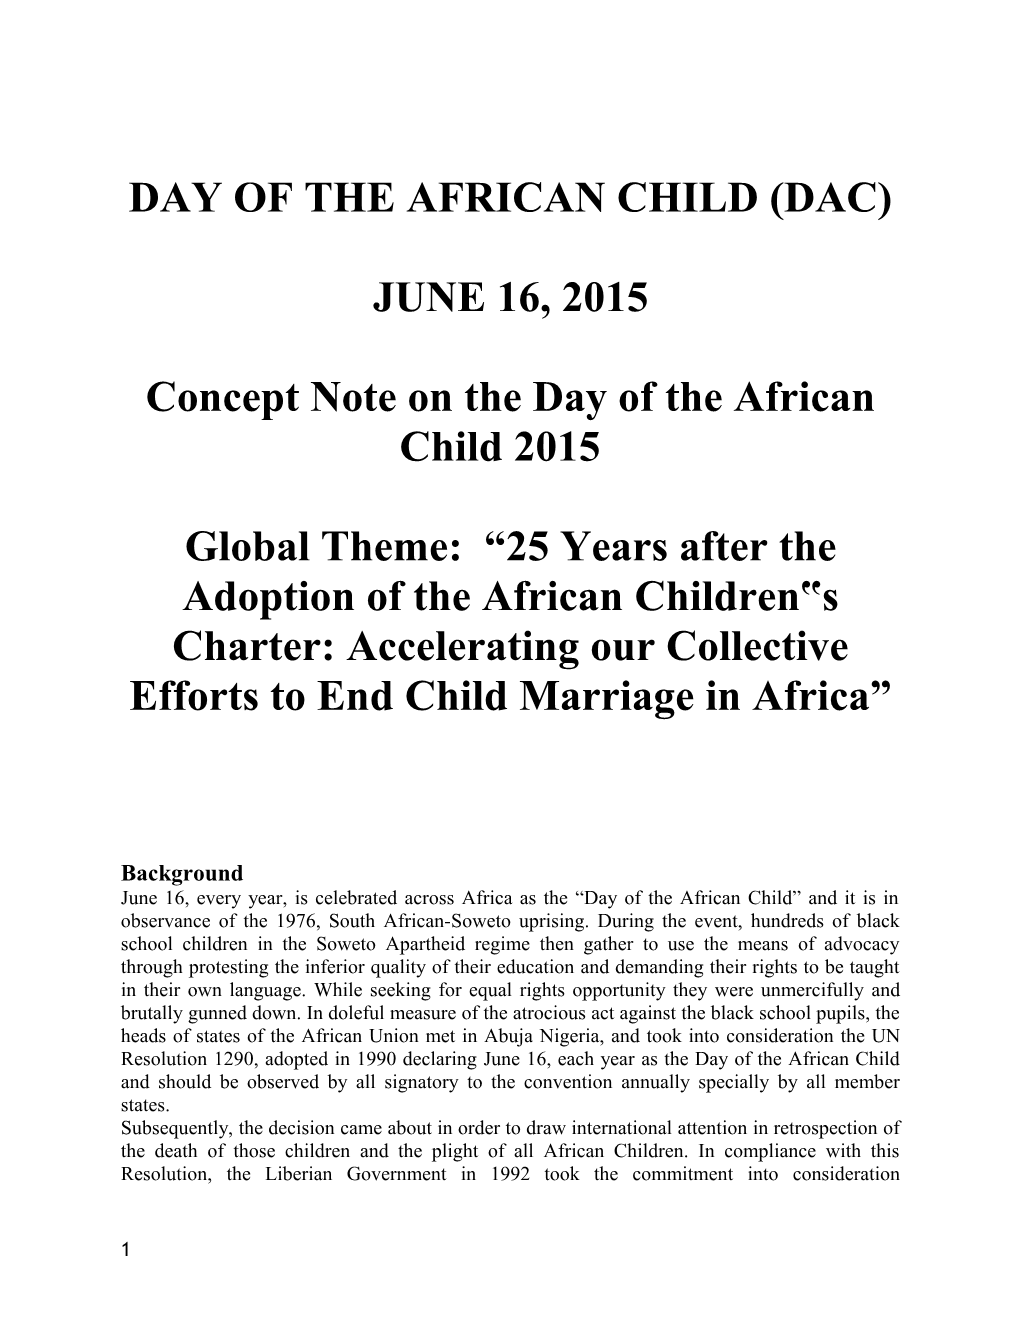 Concept Note on the Day of the African Child 2015